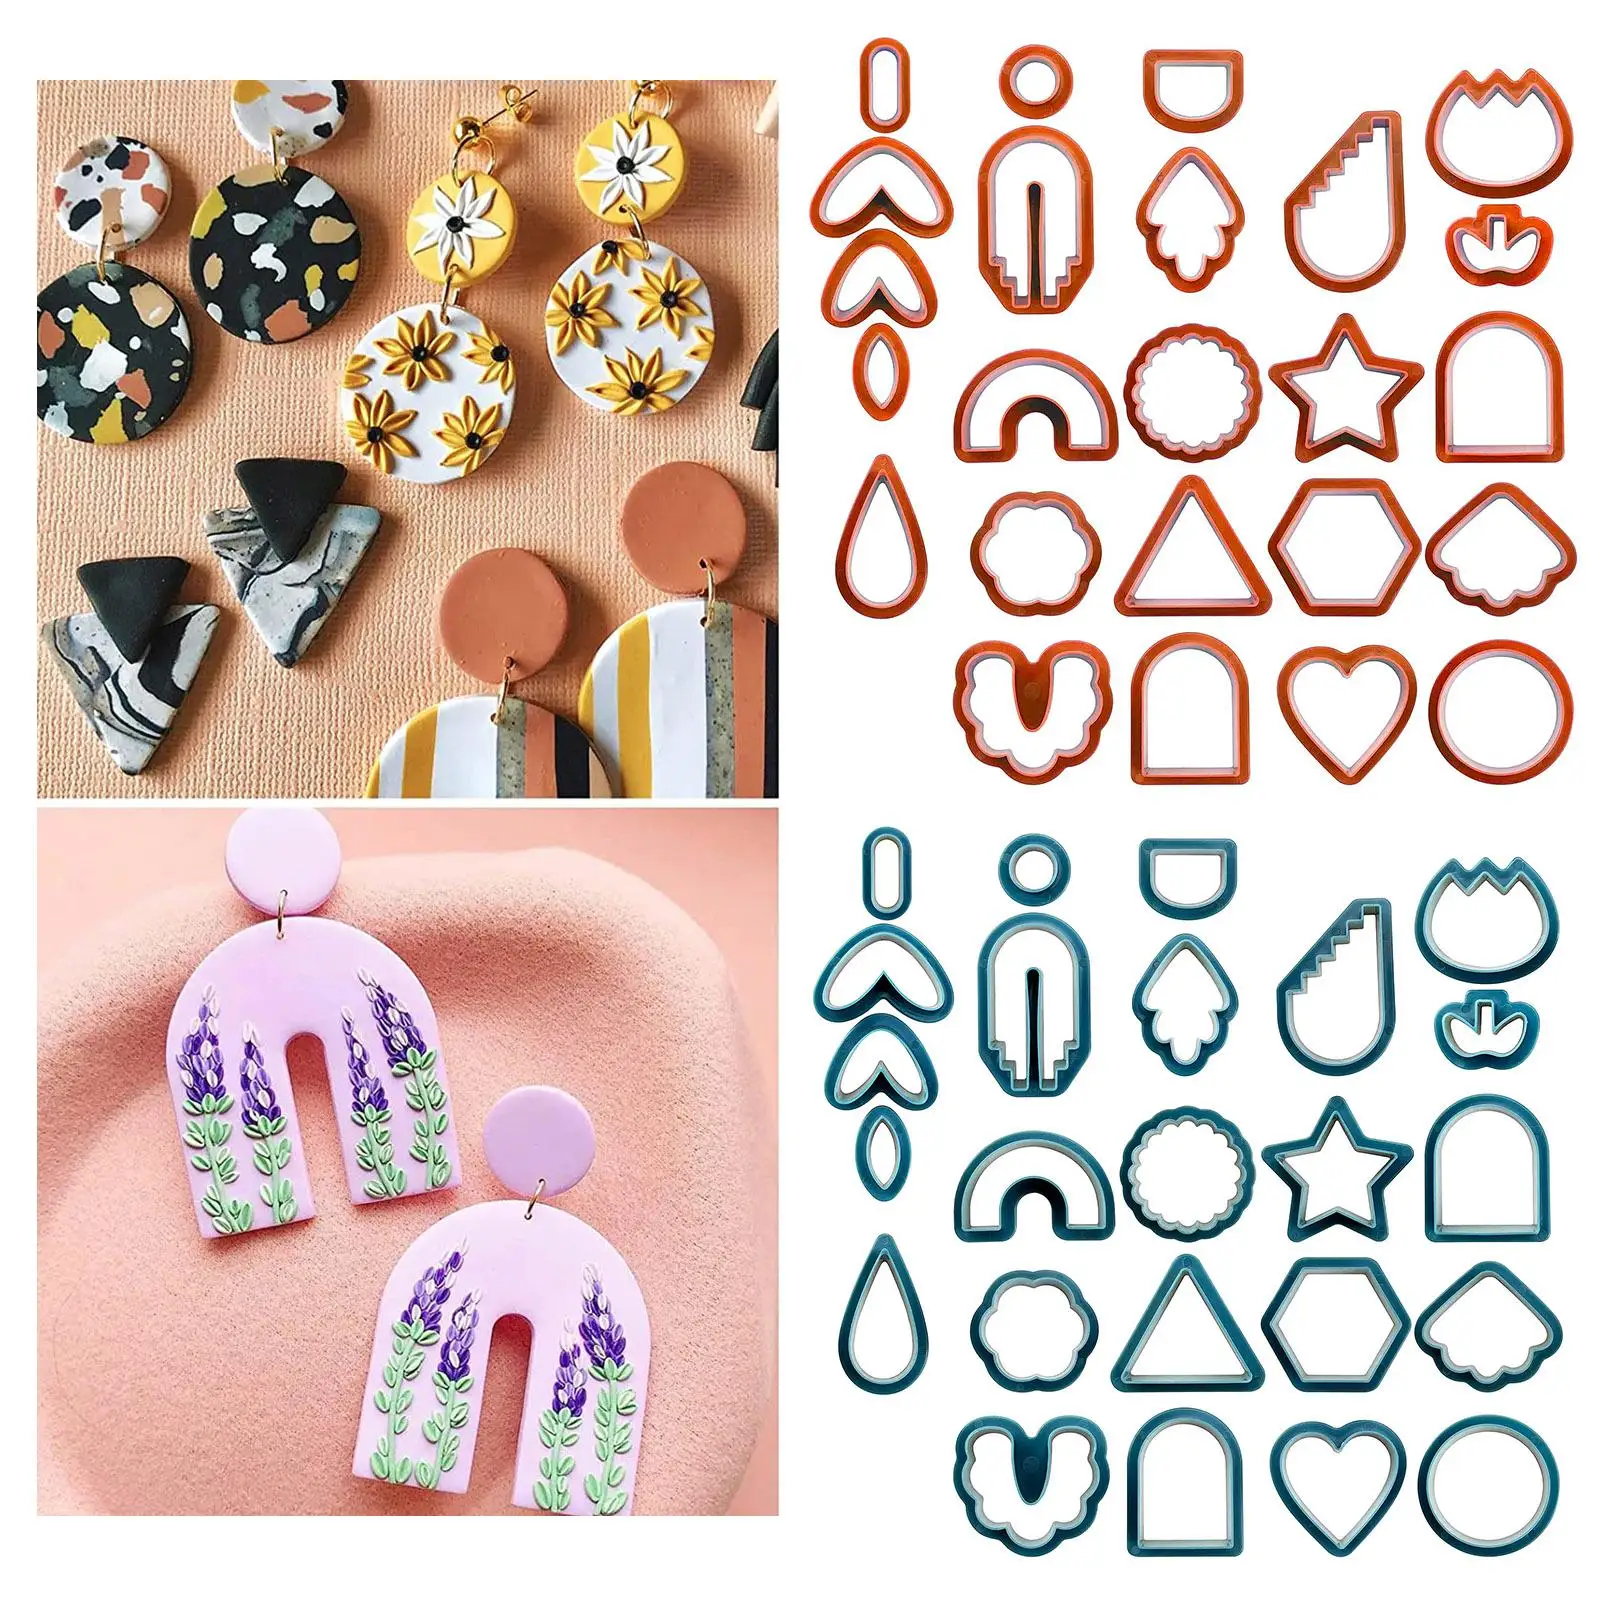 24x Polymer Clay Cutter Set Earring DIY Accessories Different Shapes Art Crafts Polymer Clay Jewelry DIY Kids Clay Cutting Tools